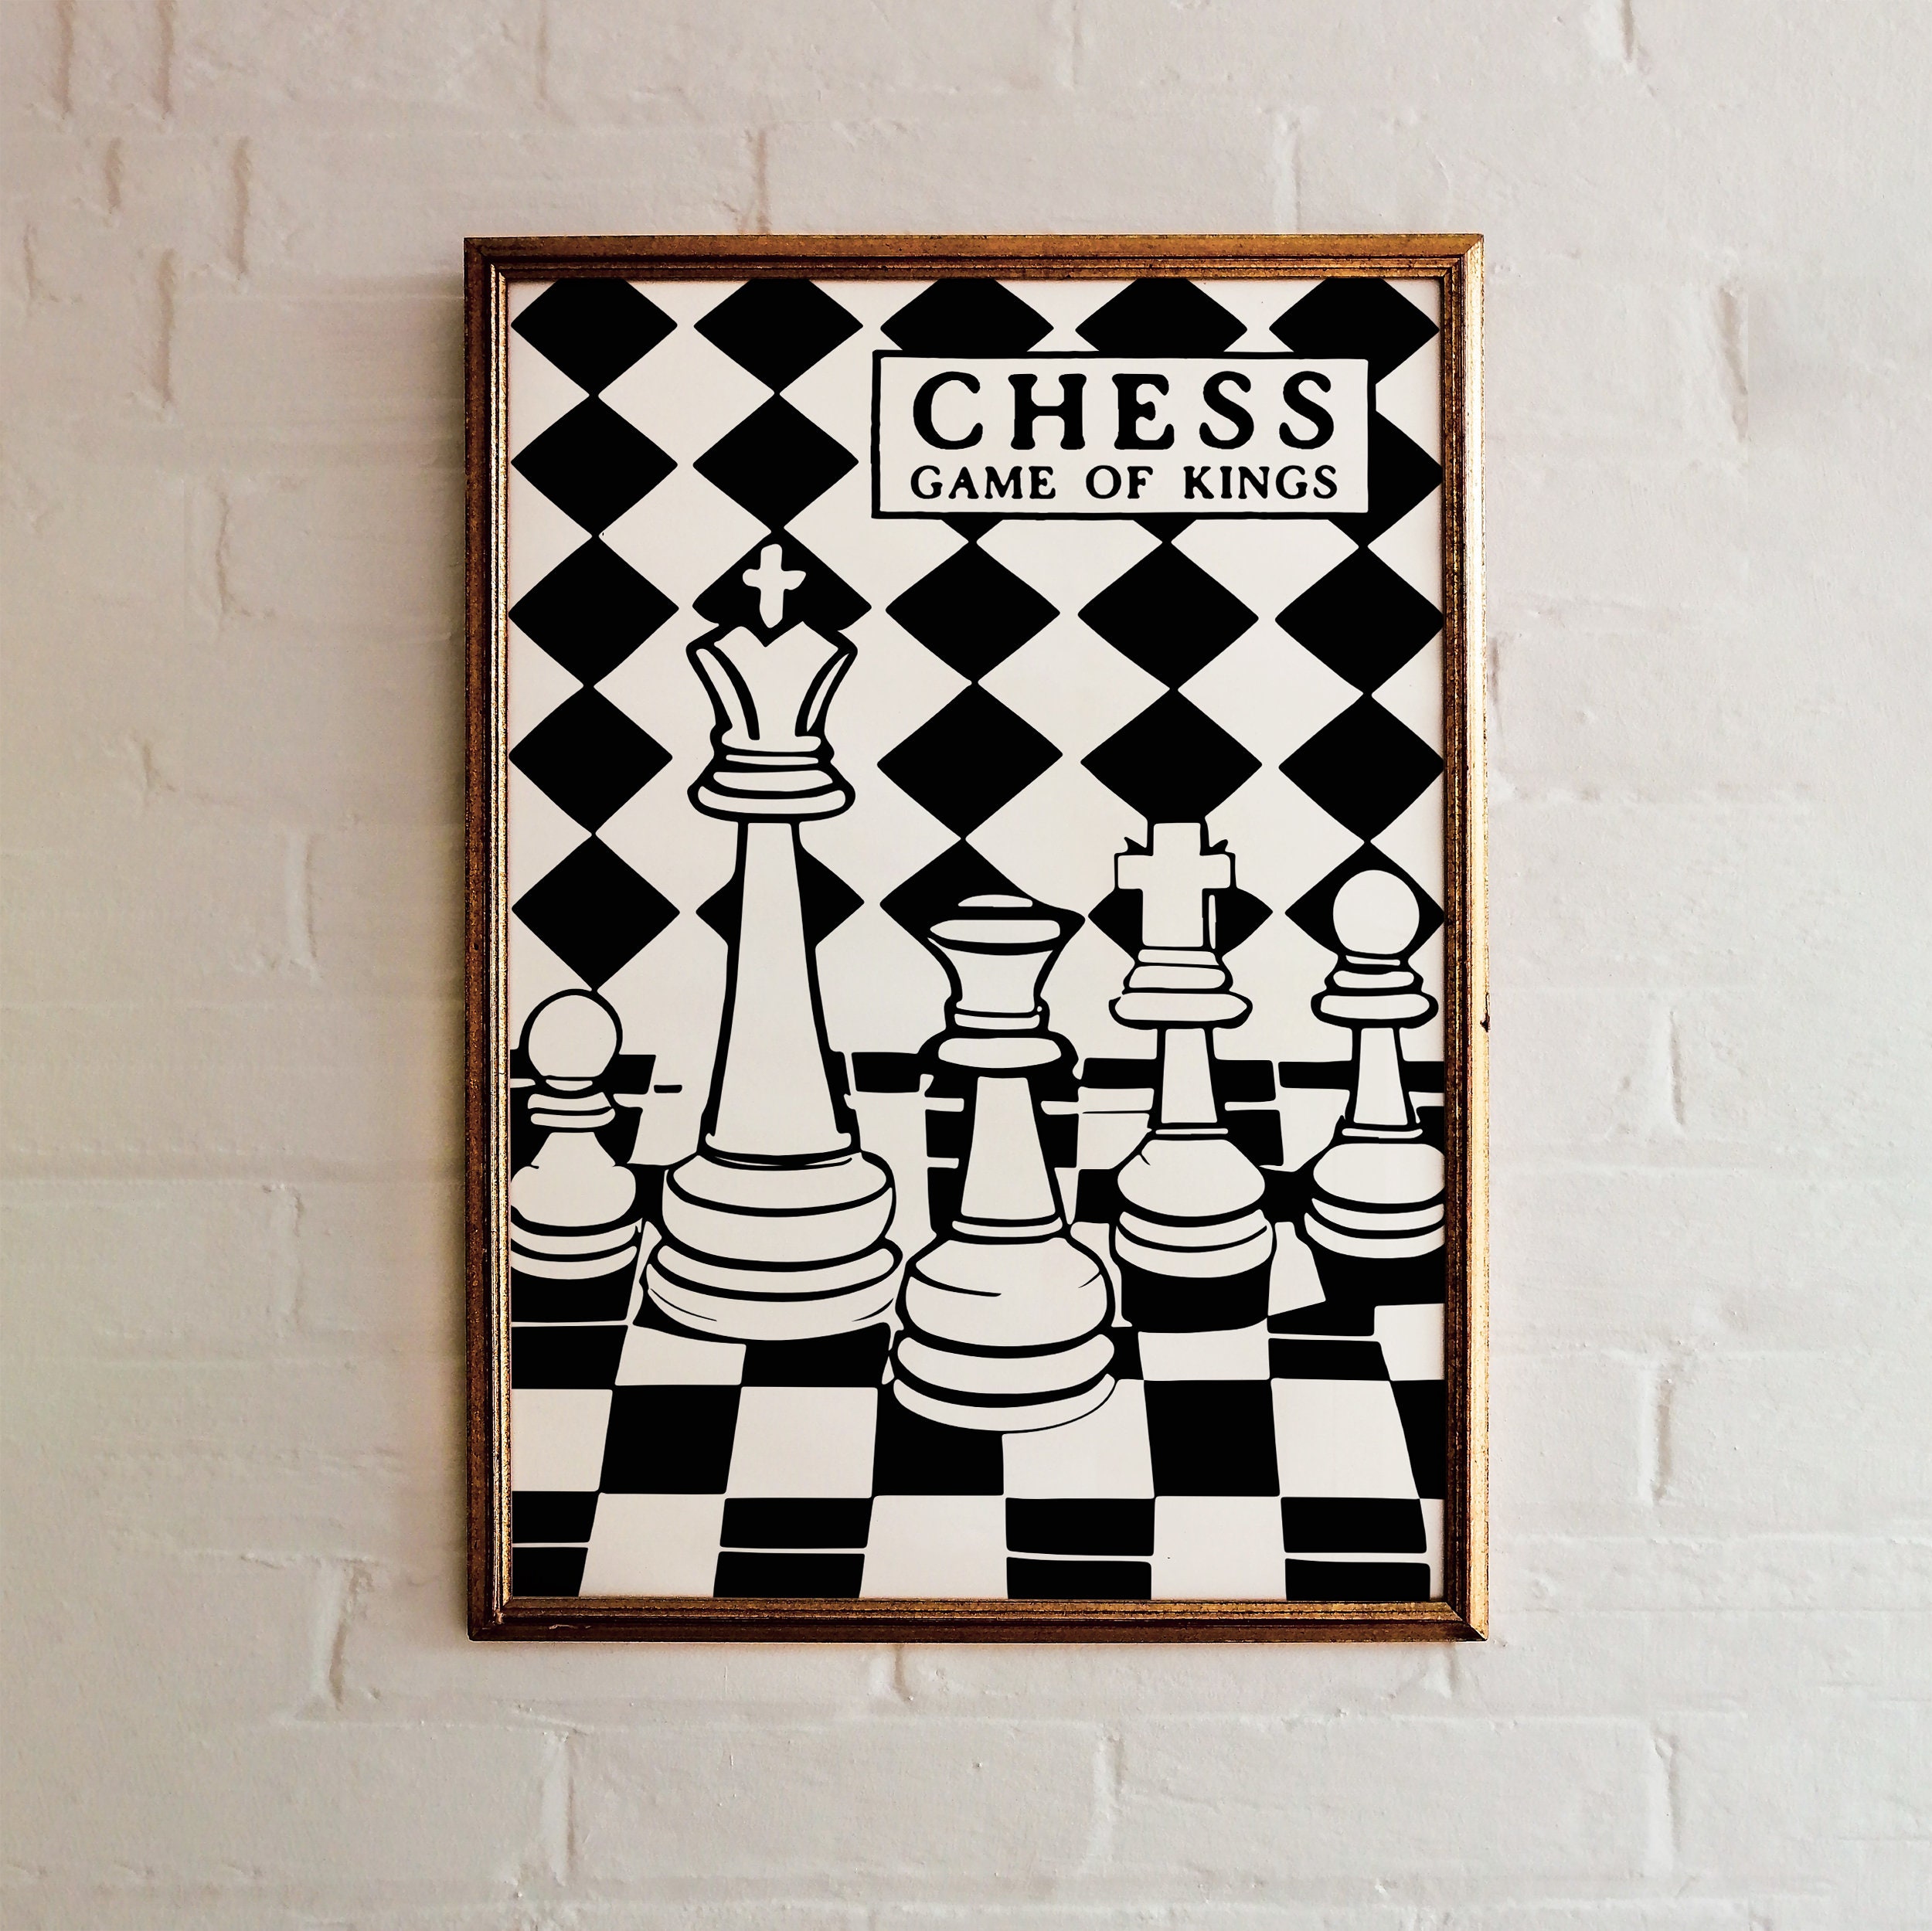 Chess: Game of Kings